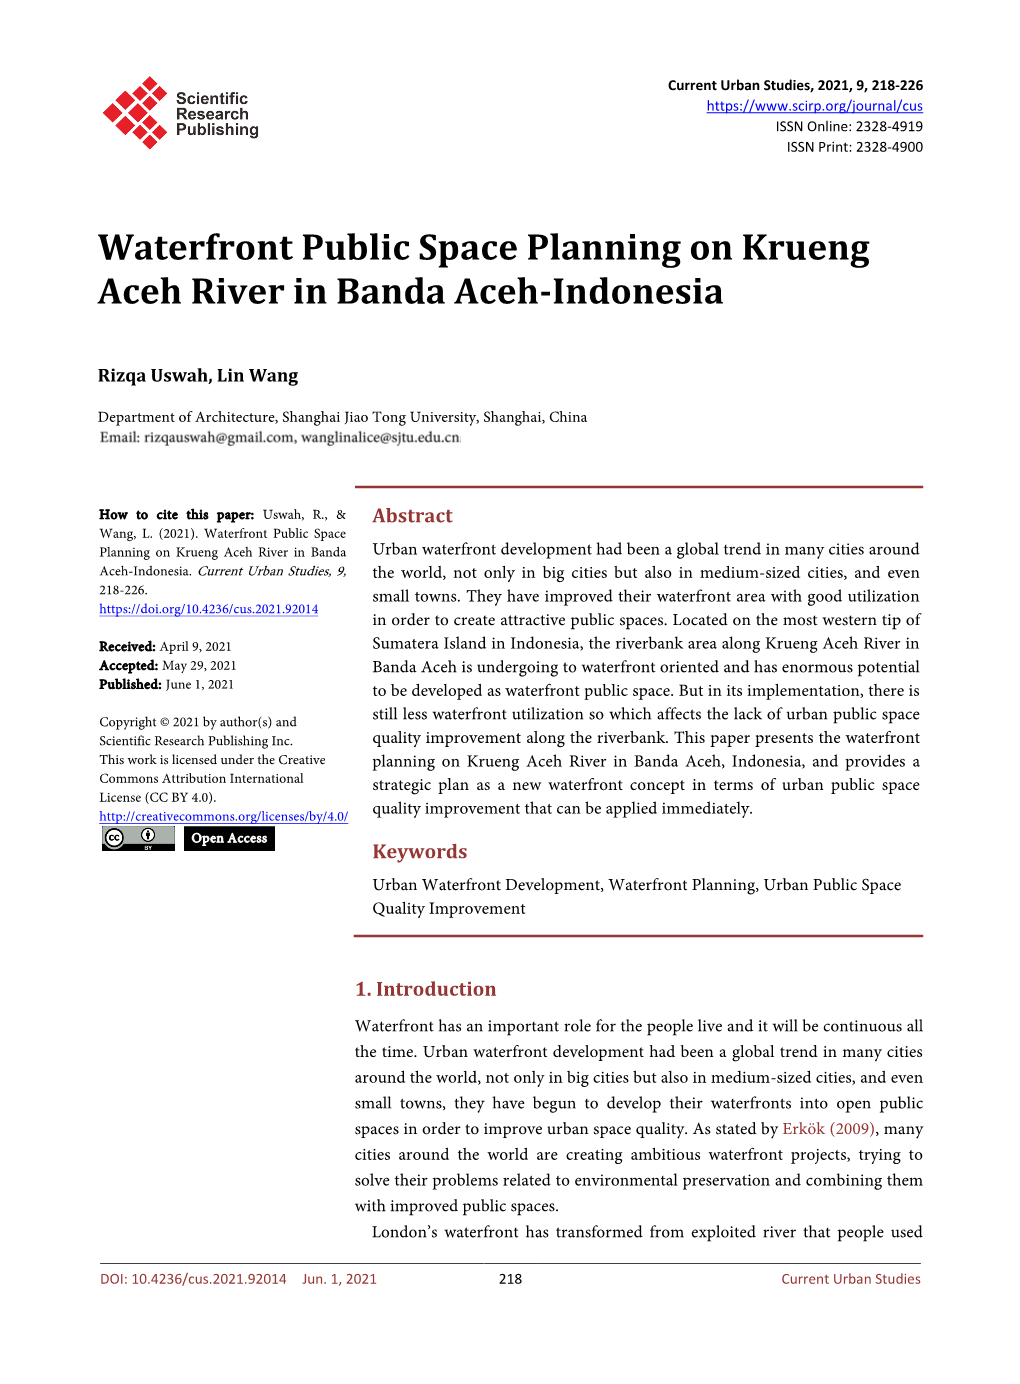 Waterfront Public Space Planning on Krueng Aceh River in Banda Aceh-Indonesia